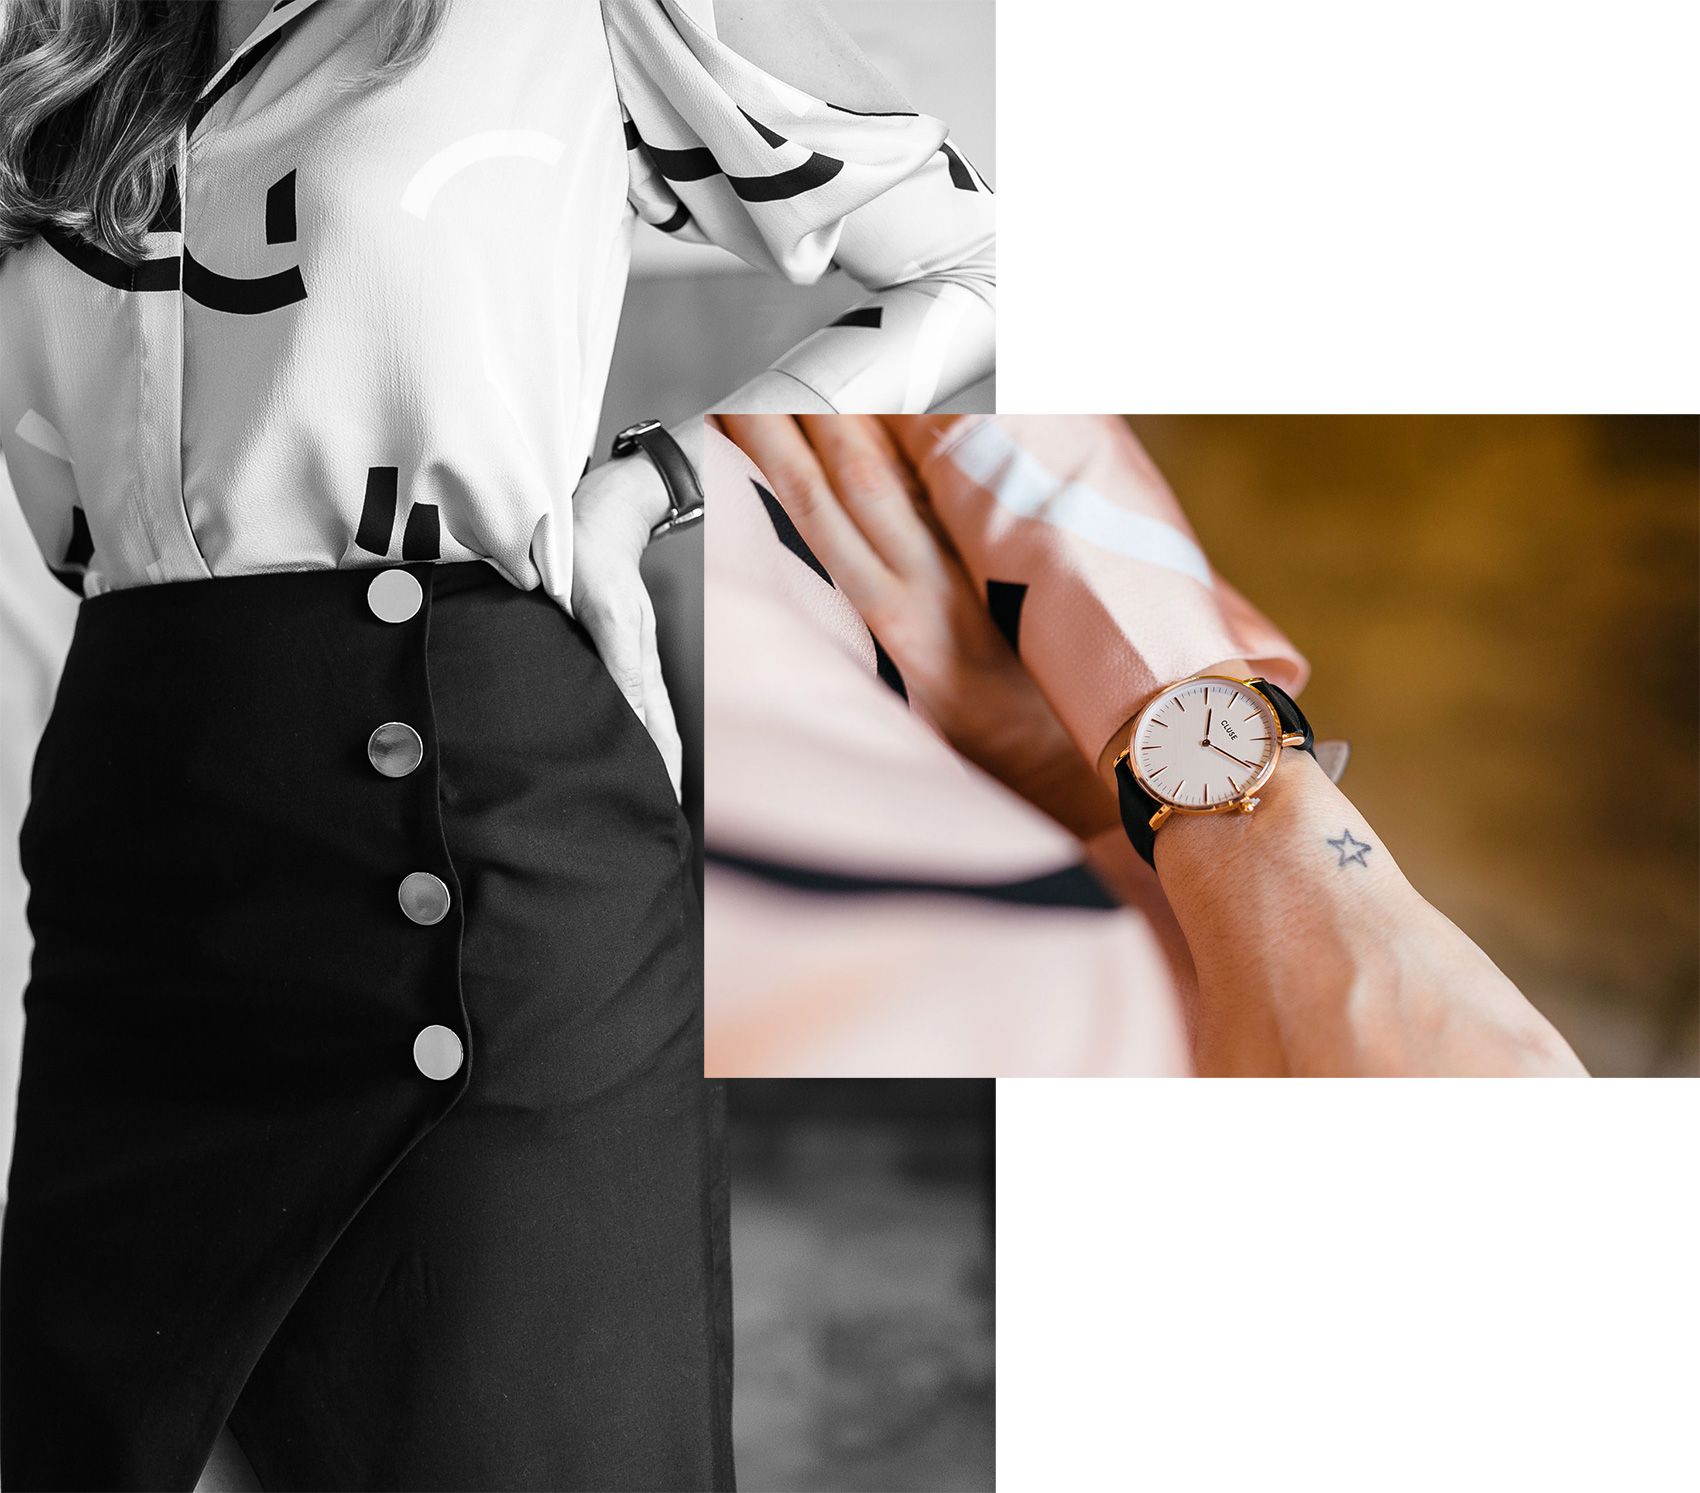 C/MEO Collective skirt and button down shirt with abstract print and open sleeves, Cluse minimalist watch with black leather strap and rose gold hardware